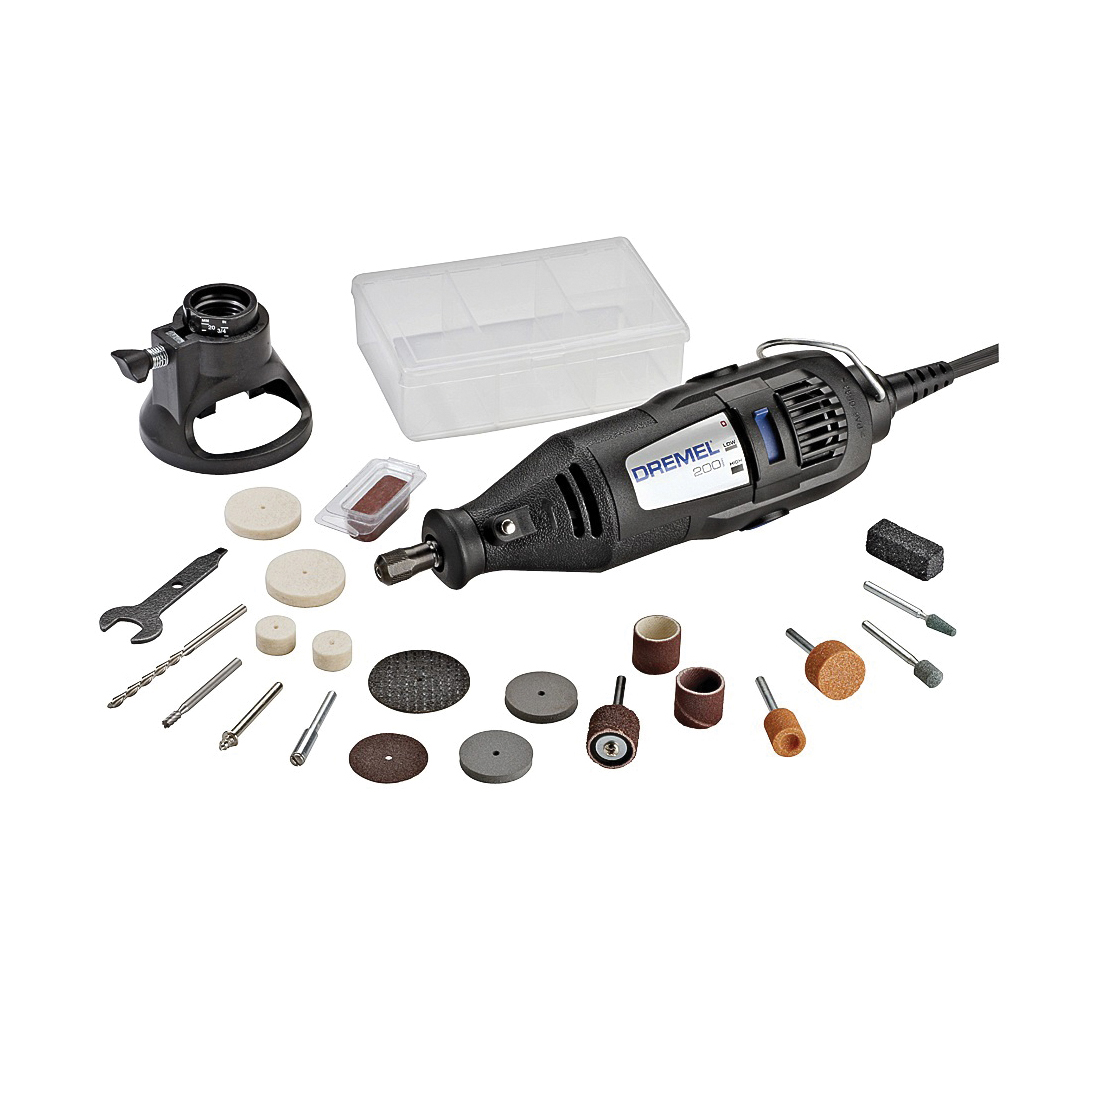 Dremel 200-1/21 Rotary Tool Kit, 0.9 A, 1/8 in Chuck, Keyed Chuck, 2-Speed, 15,000 to 35,000 rpm Speed